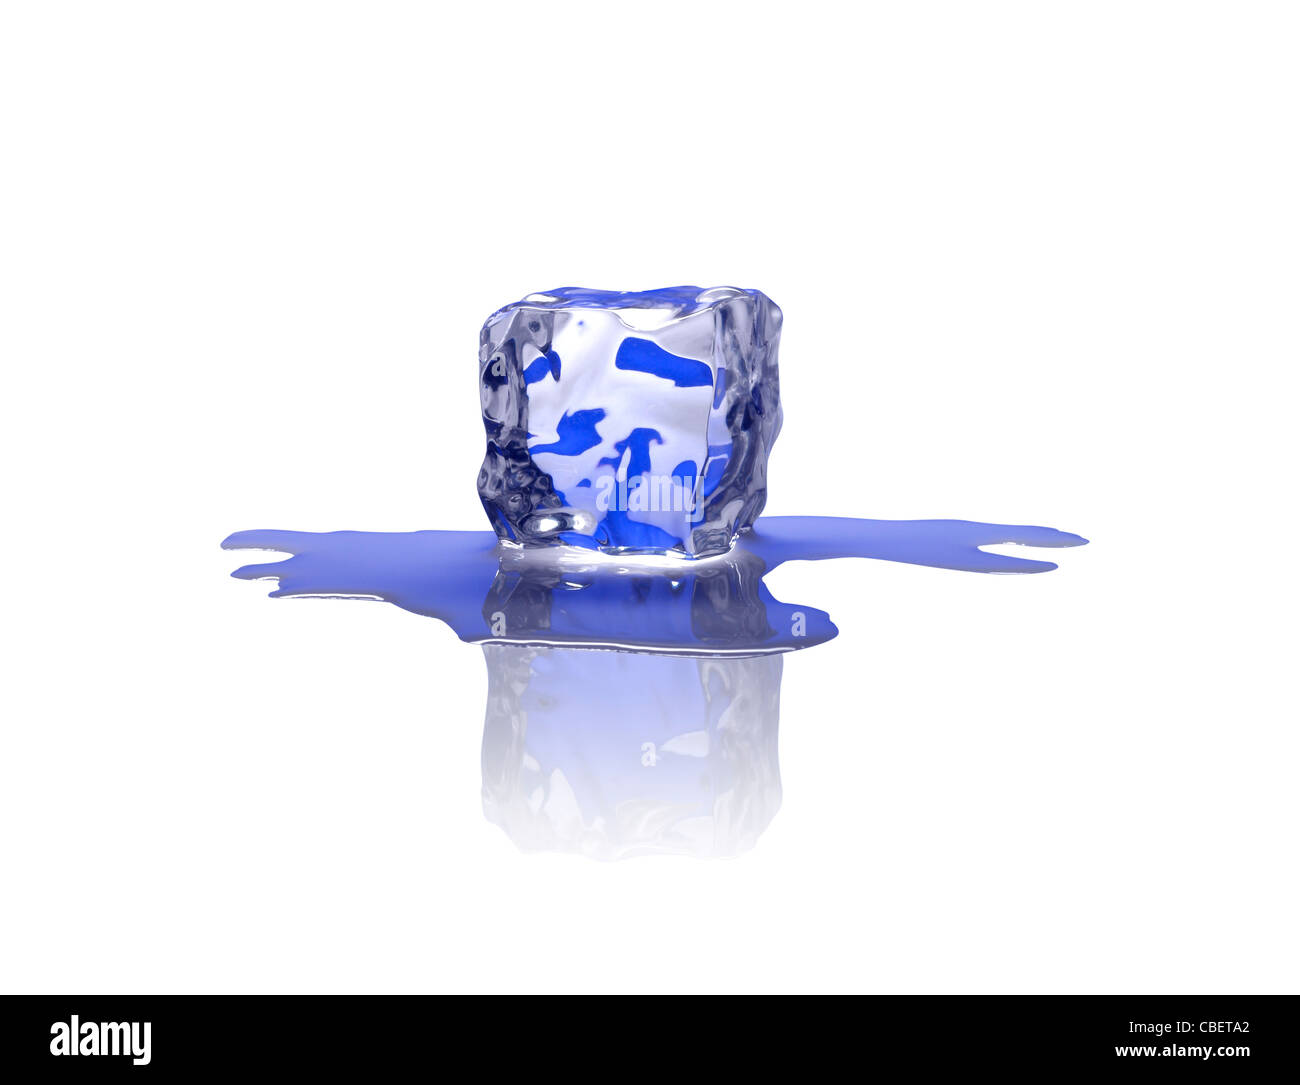 Melting Ice Cube With Puddle Of Water On White Background Stock Photo